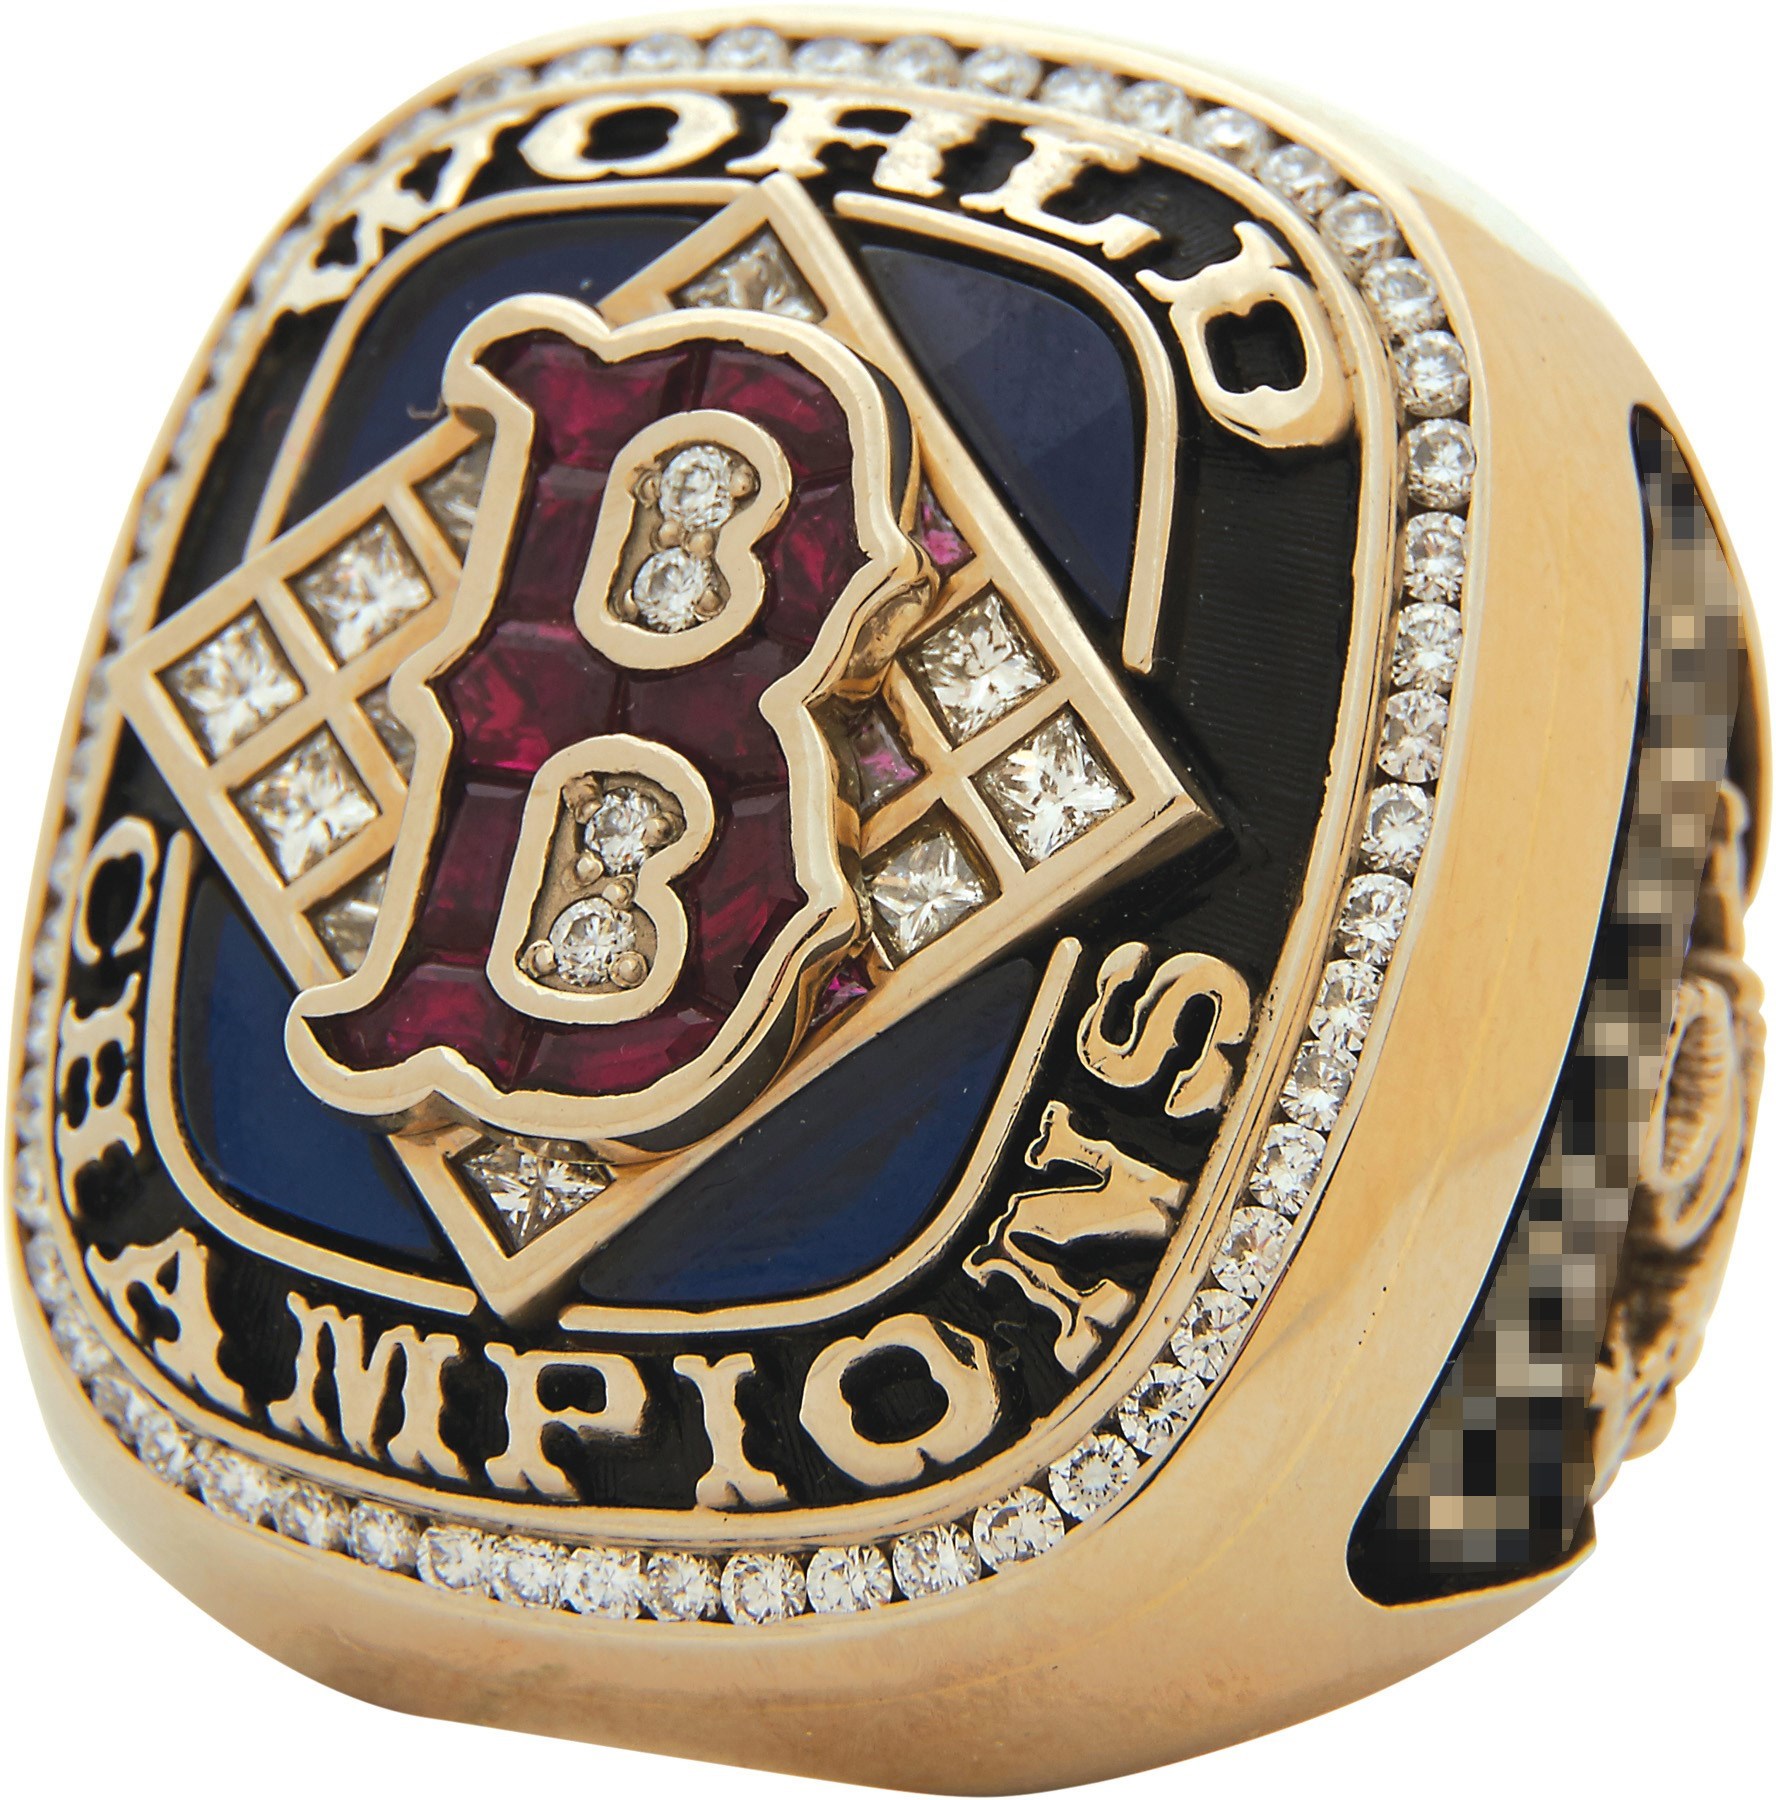 - 2004 Boston Red Sox "Reverse The Curse" World Series Championship Ring